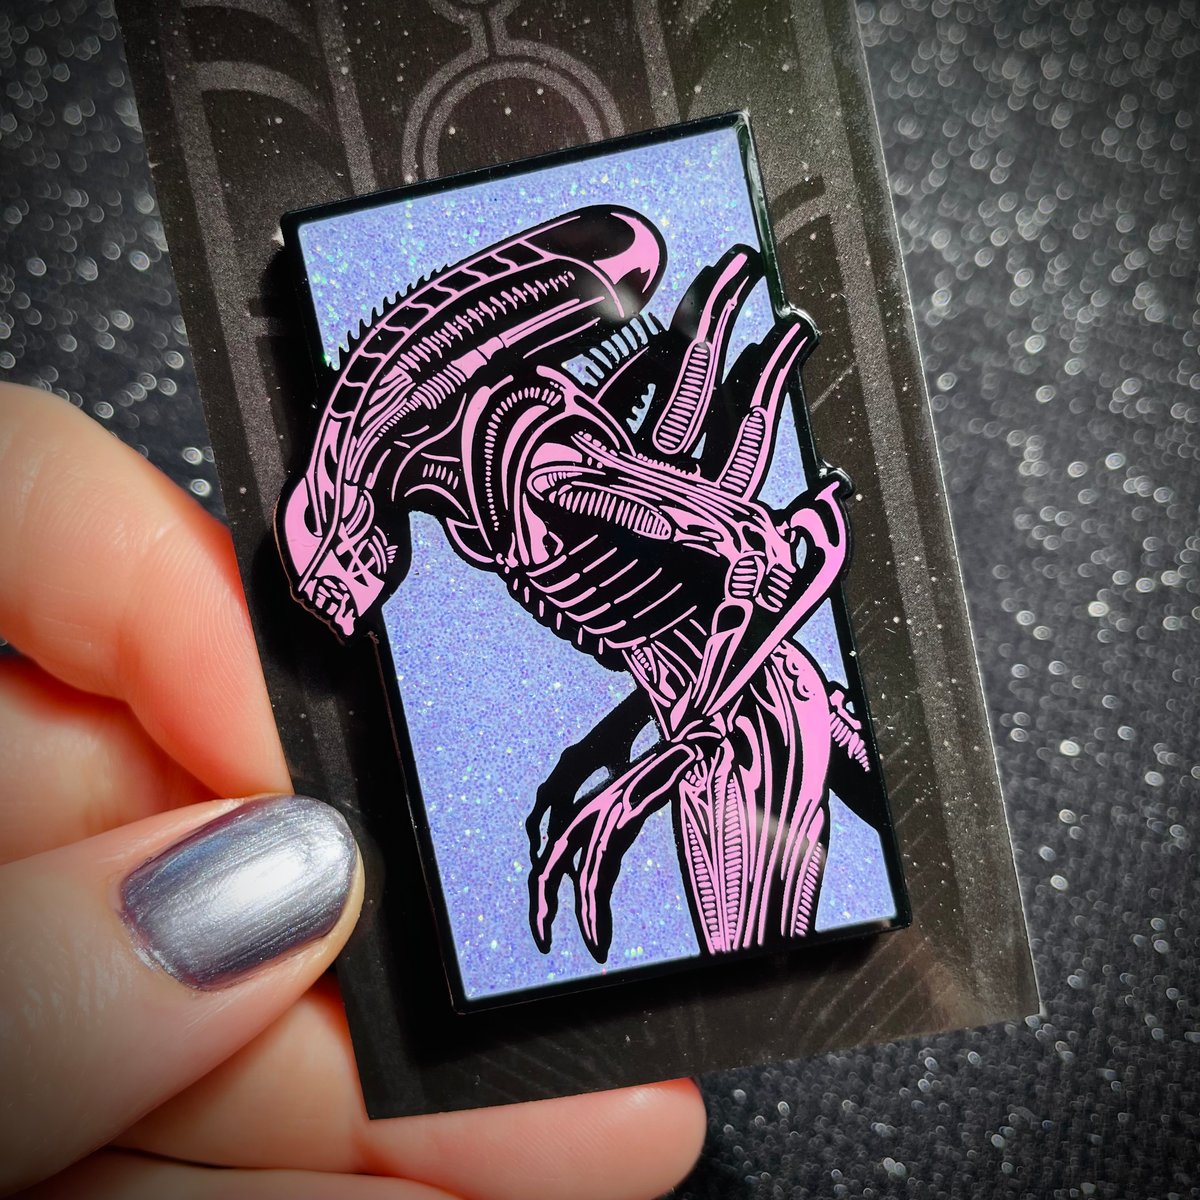  Prime Creations Aliens Enamel Pin for UFO Lovers - The